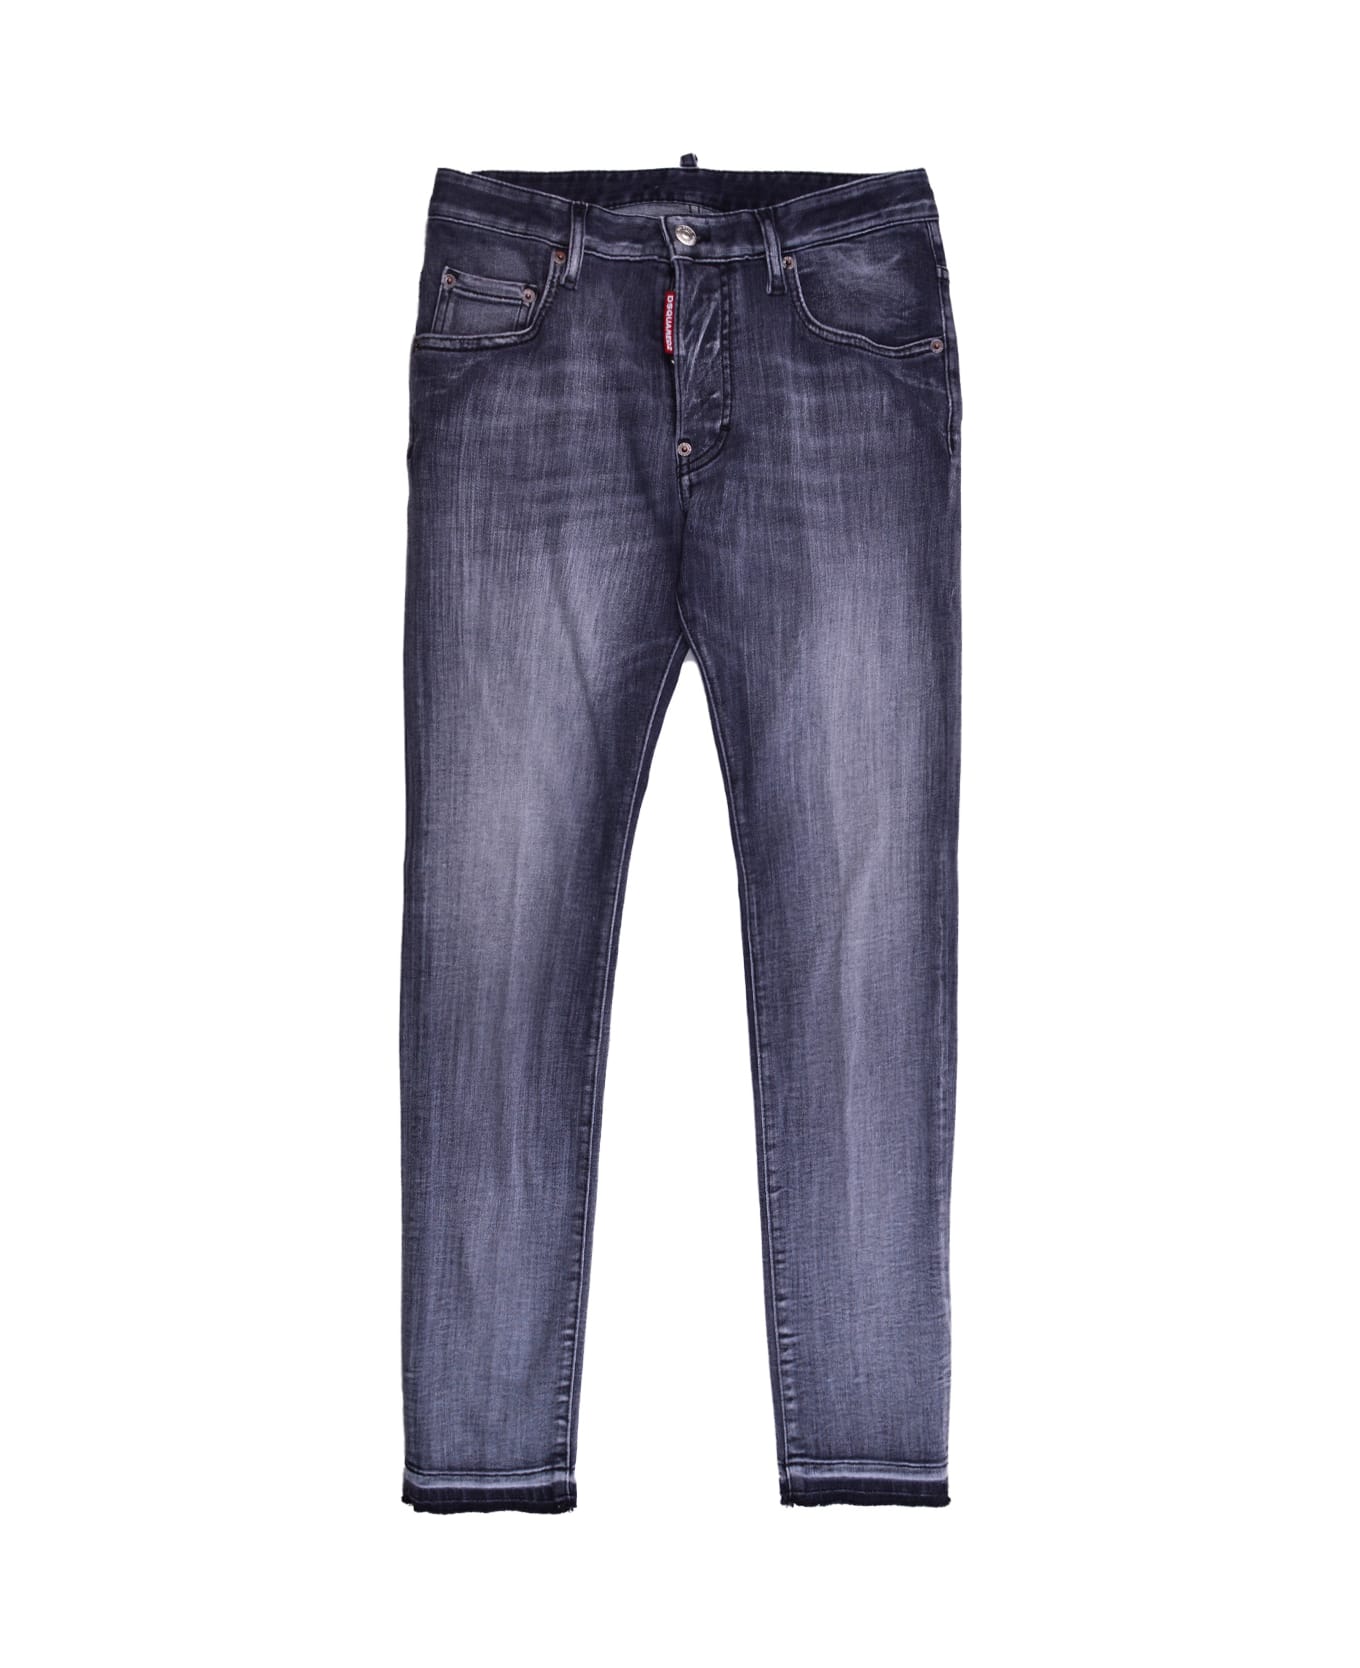 Dsquared2 Jeans - Grey